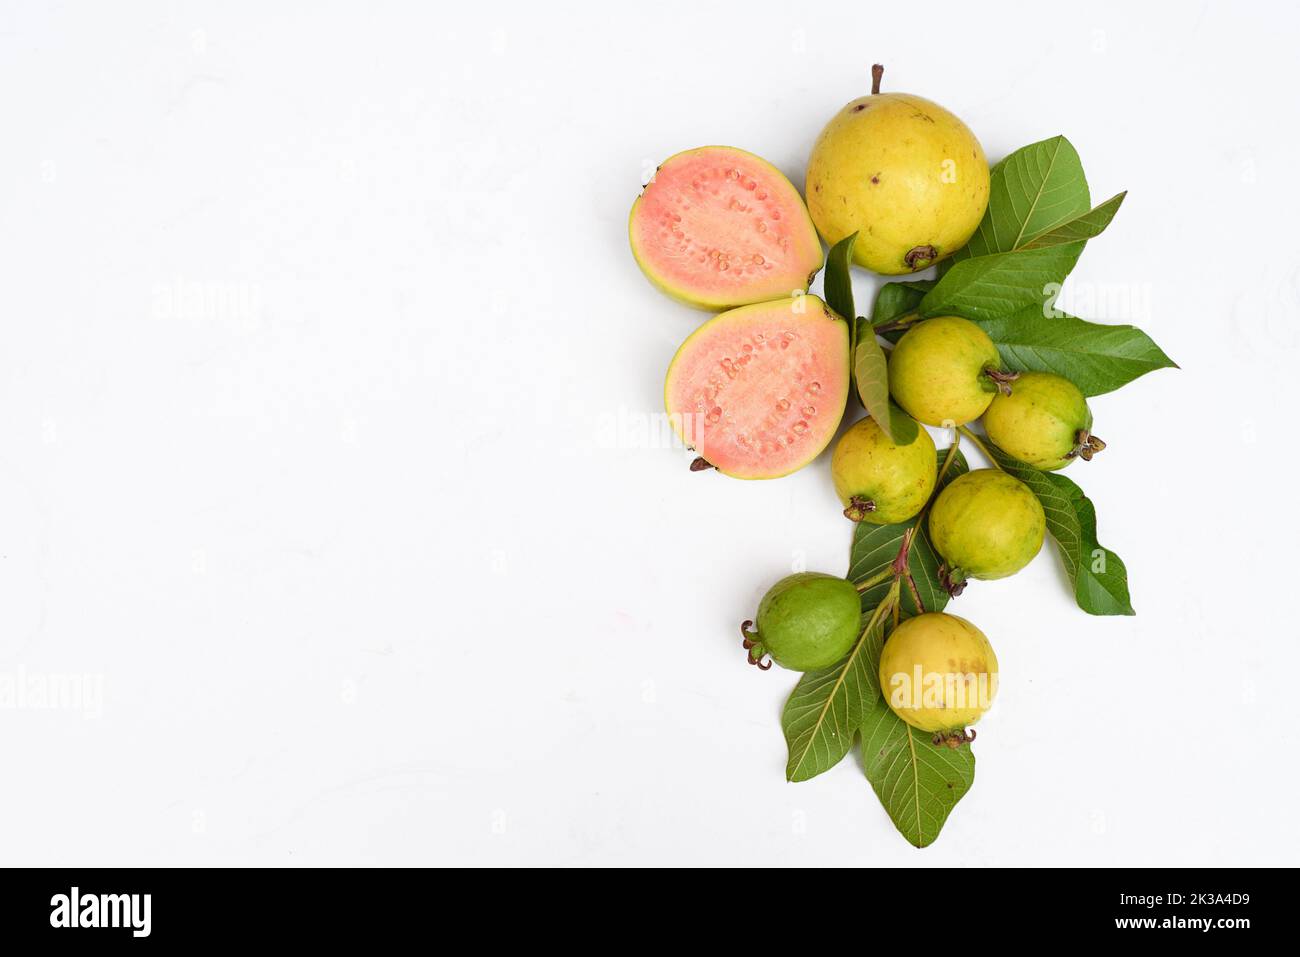 Ripe guava fruit with leaves on white background with copy space Stock Photo